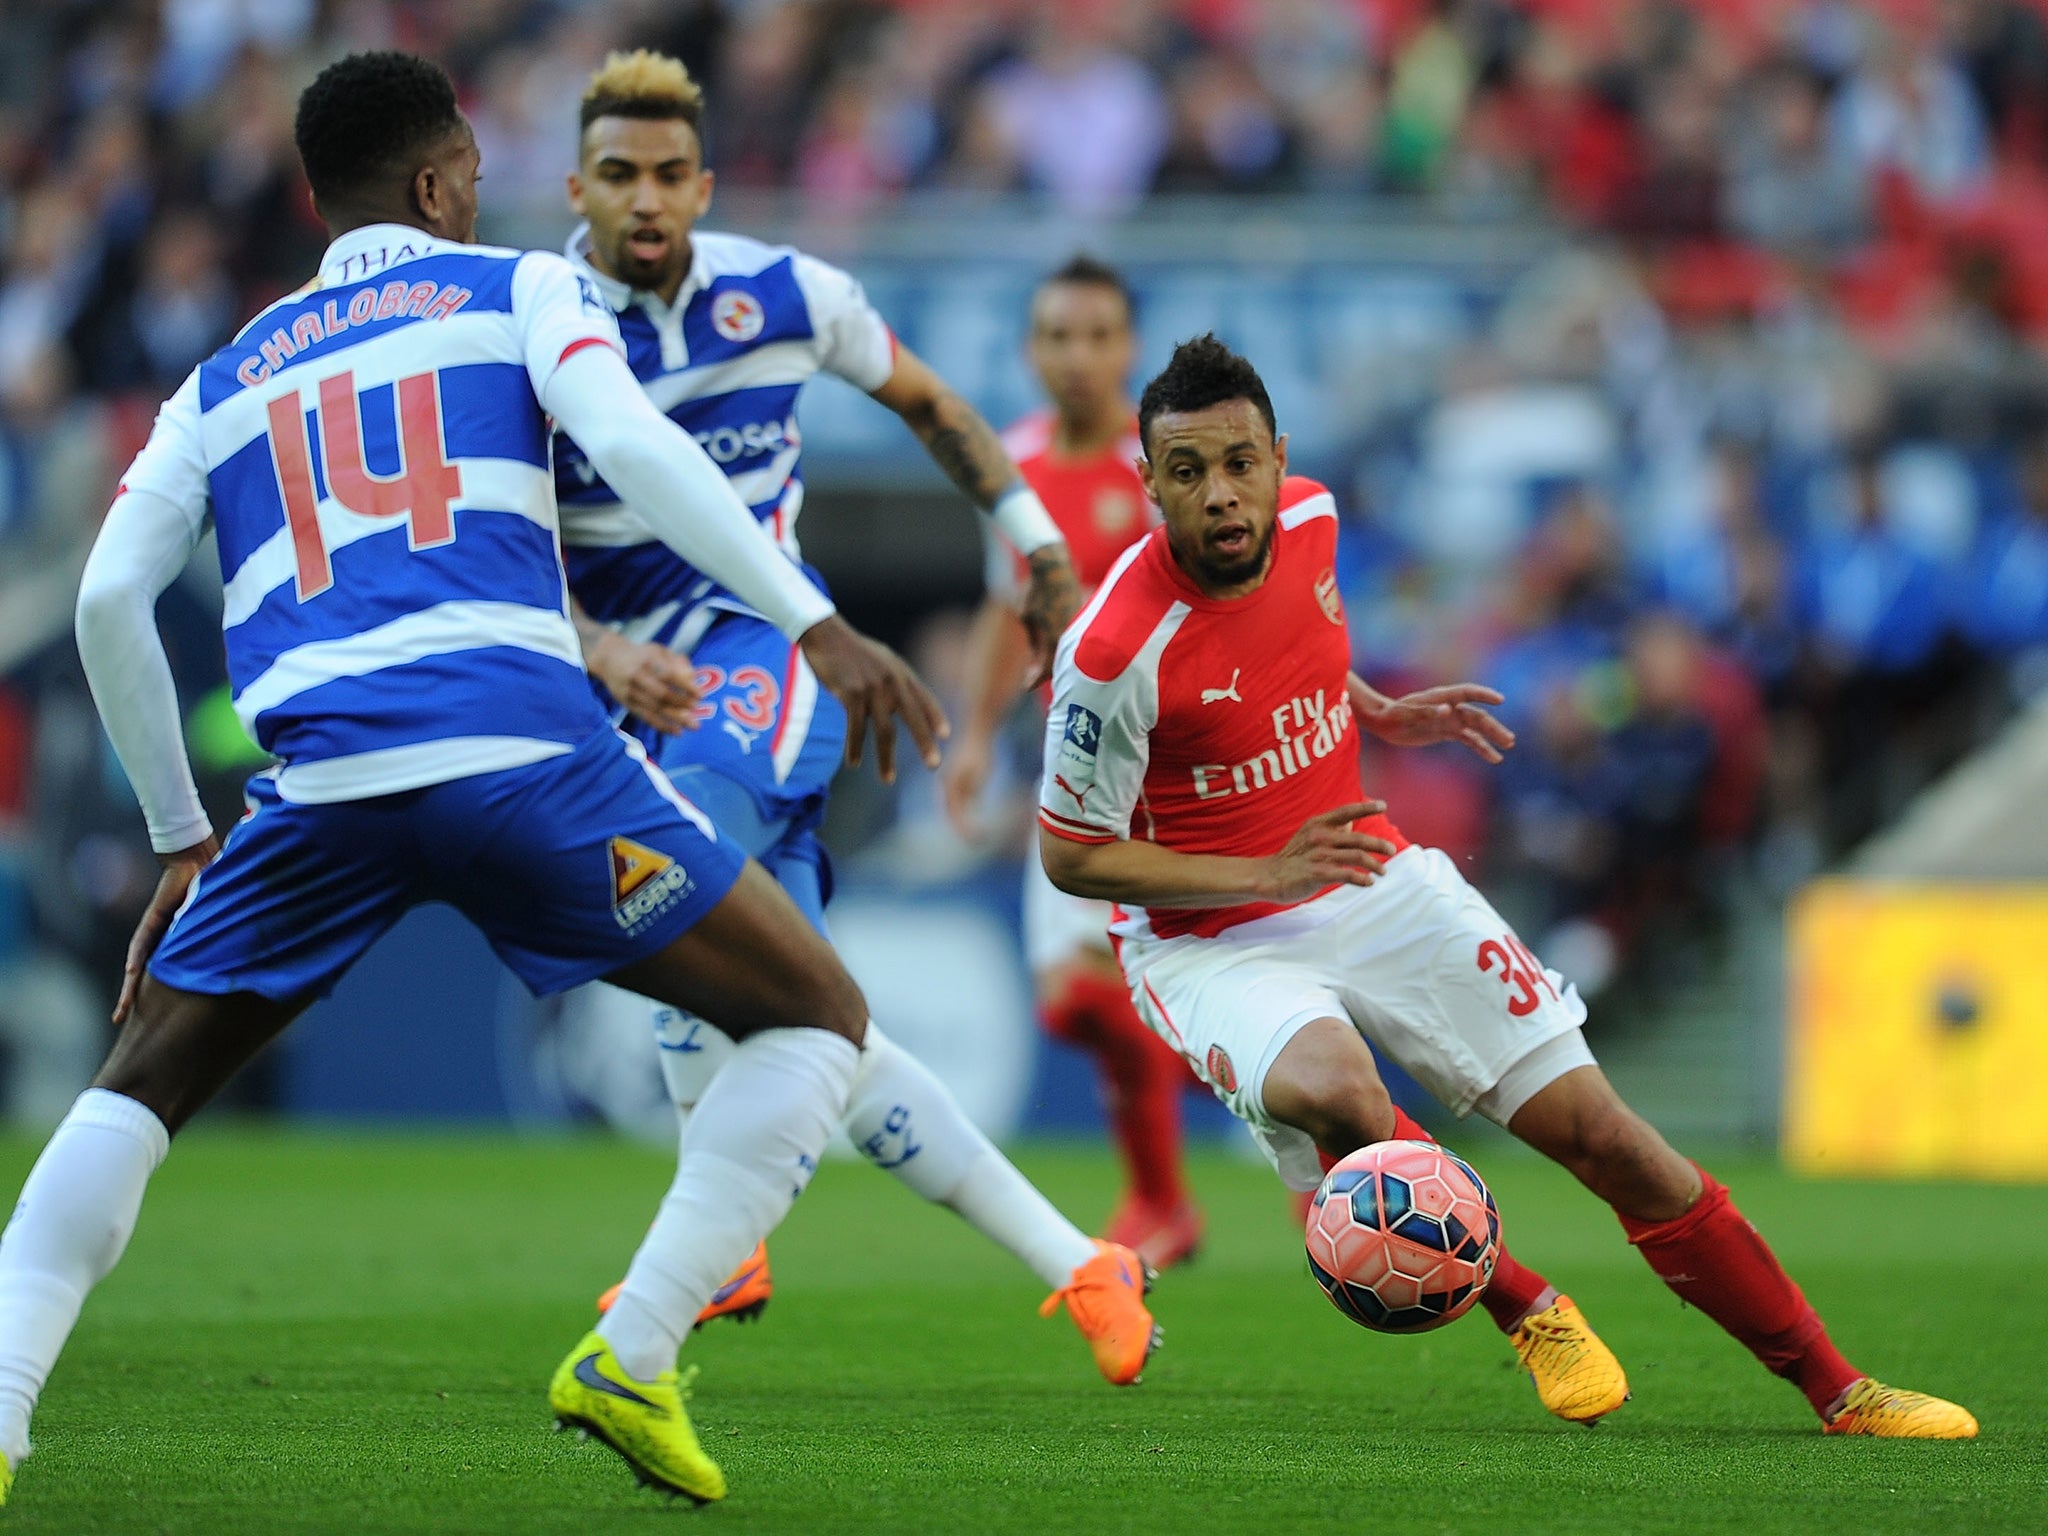 Arsenal's Francis Coquelin against Reading in the 2015 FA Cup semi-final